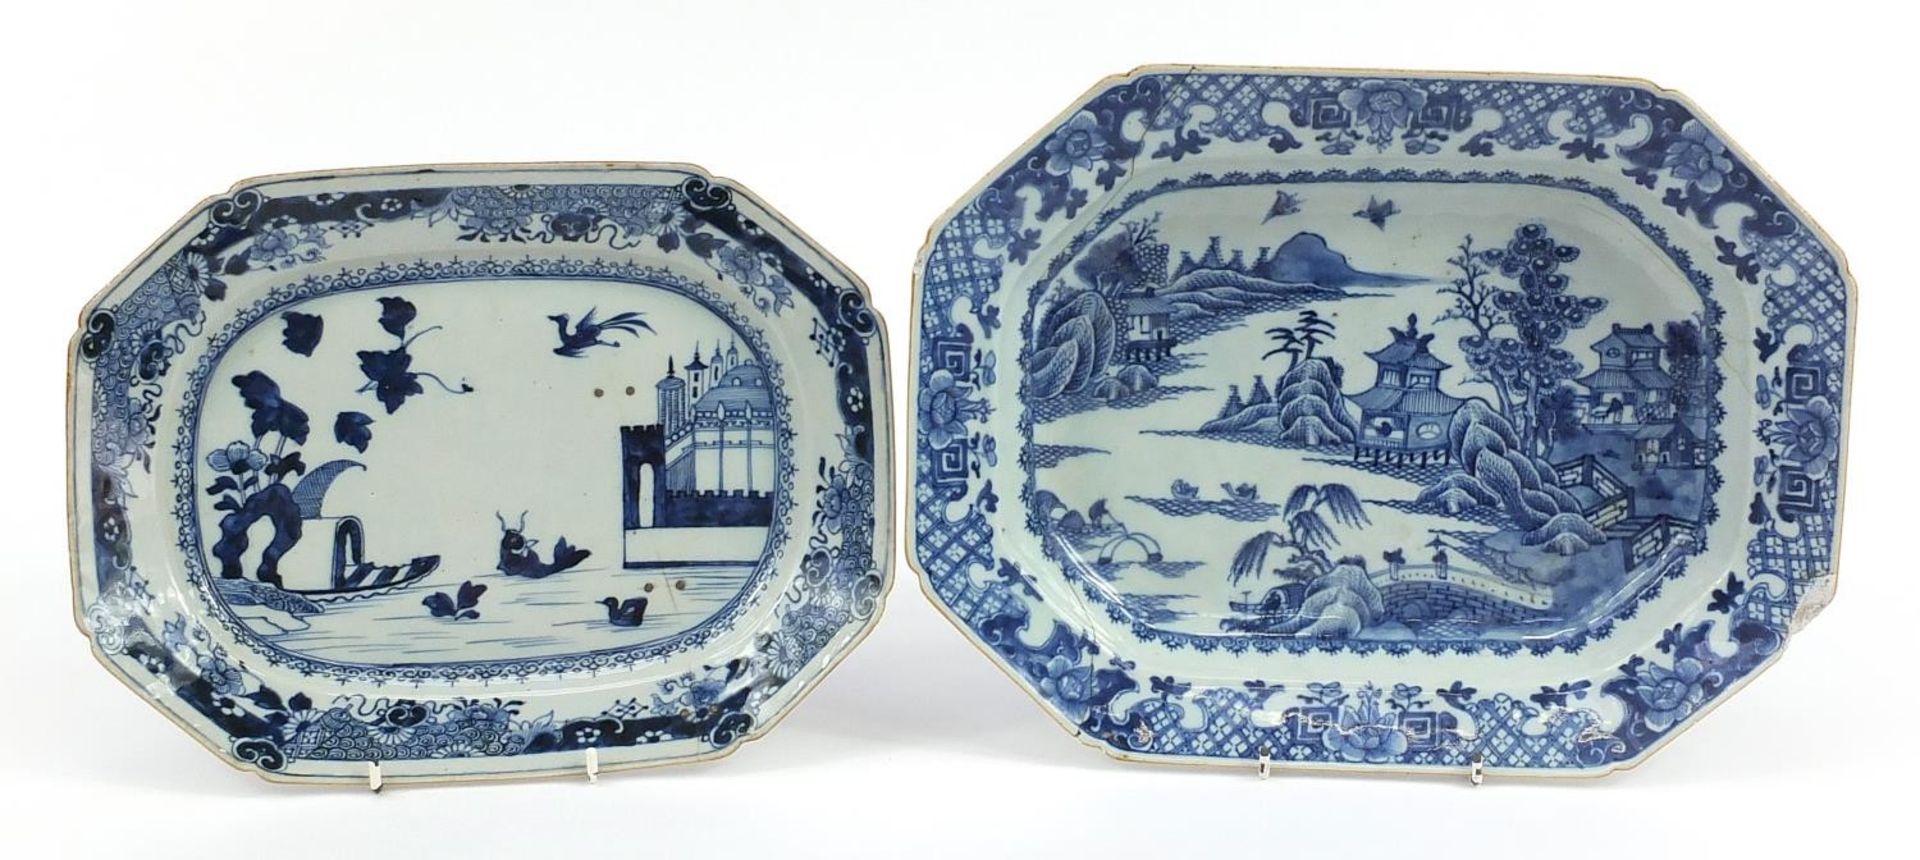 Chinese blue and white porcelain platter and footed serving dish, each hand painted with landscapes,